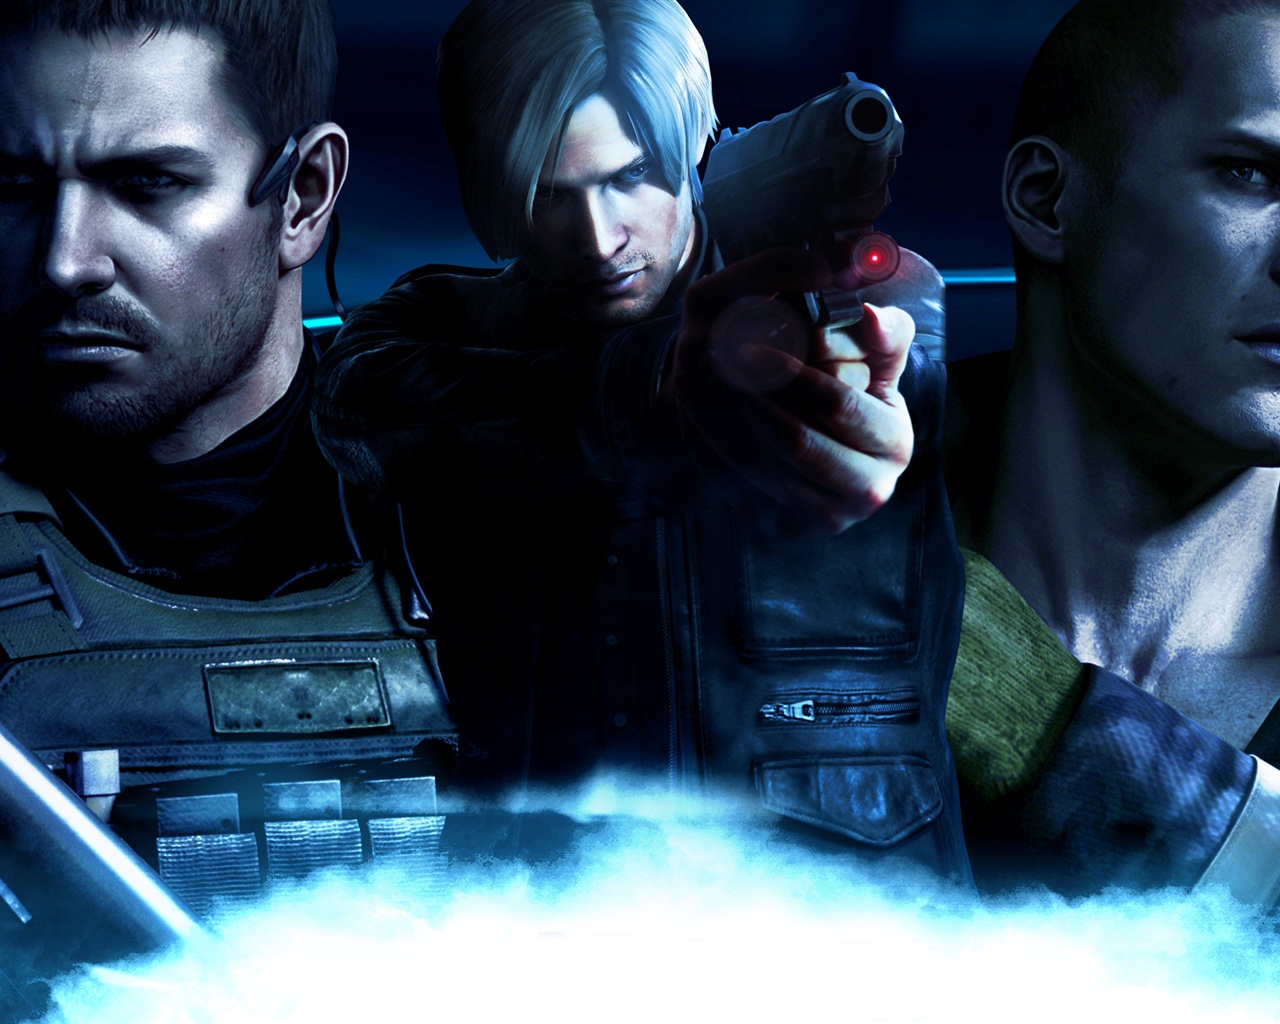 Resident Evil 6 HD game wallpapers #6 - 1280x1024